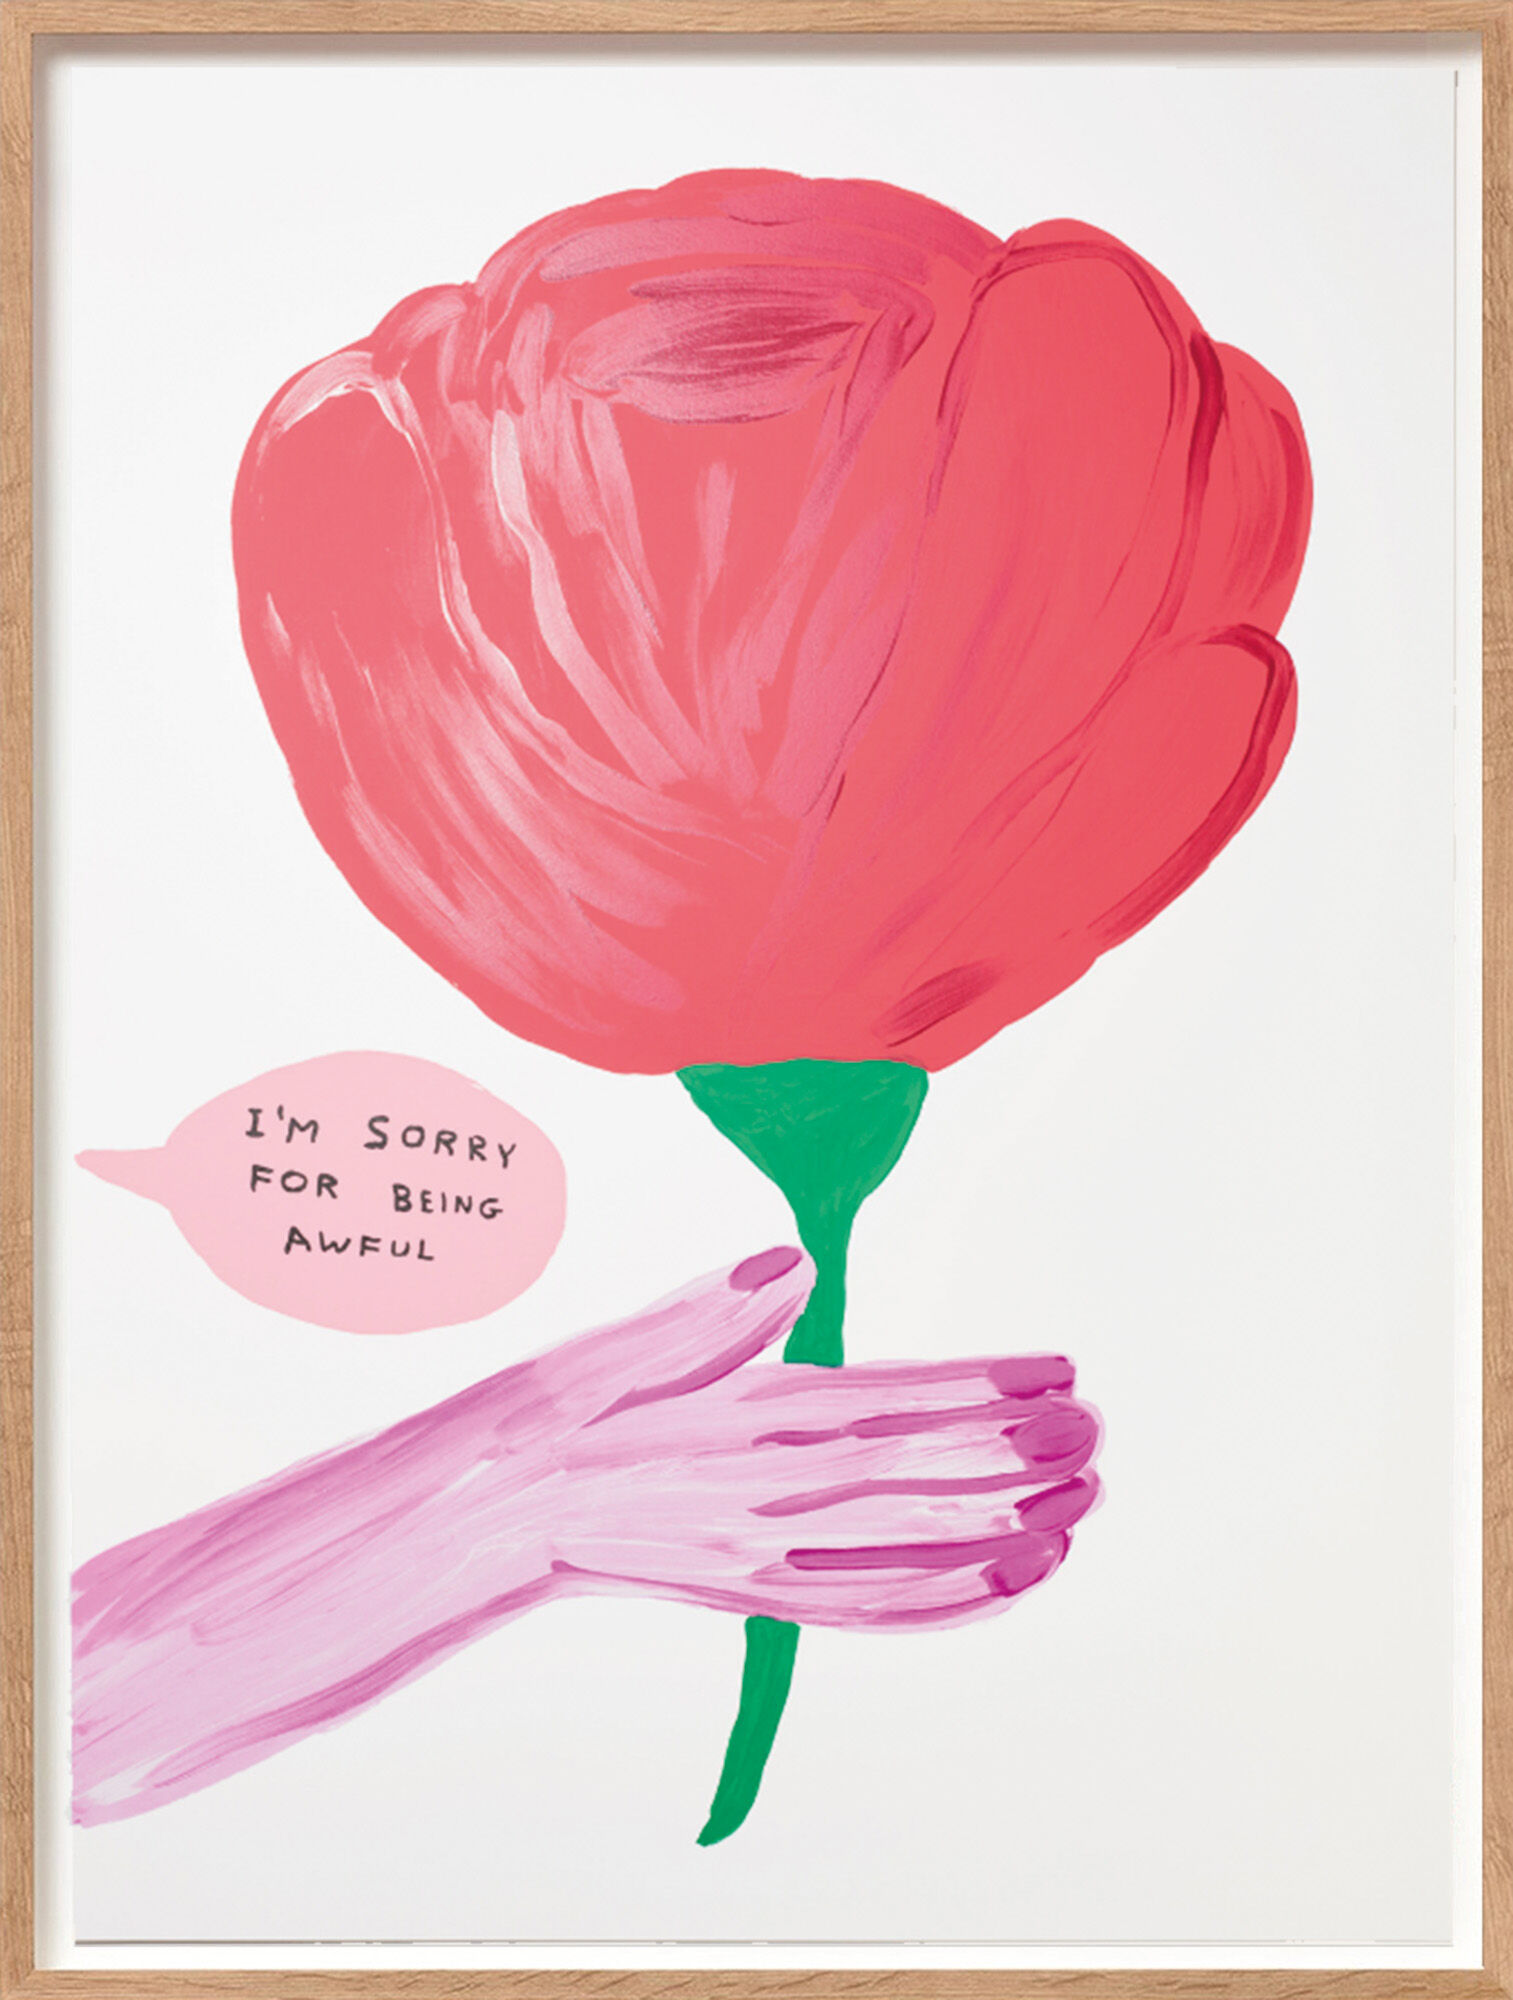 Picture "I'm sorry for being awful" (2021) by David Shrigley